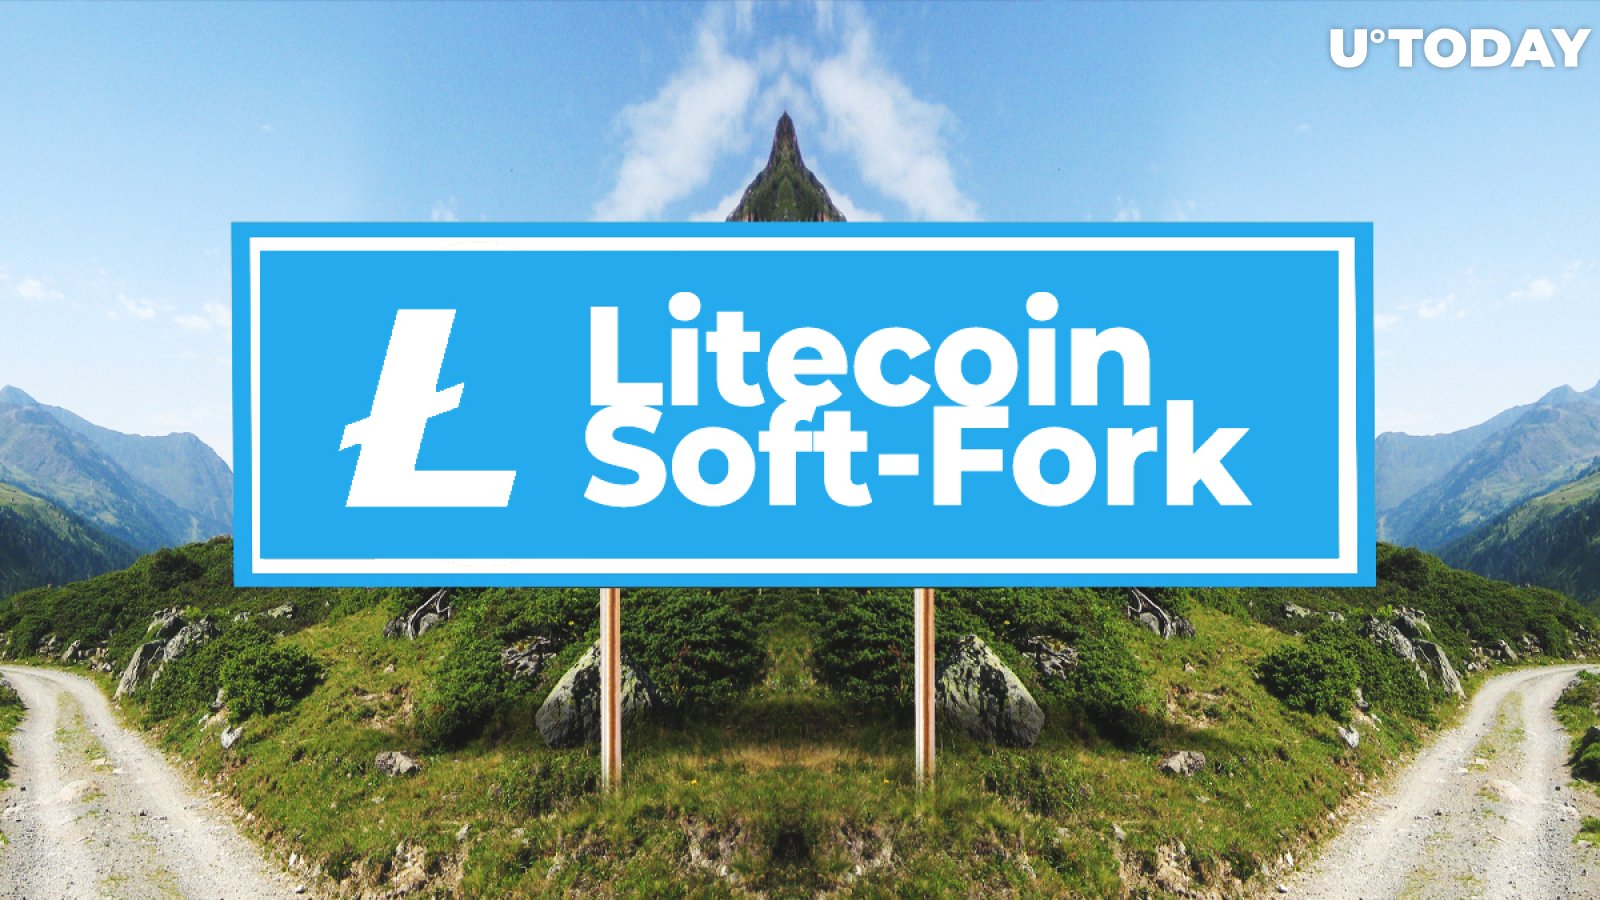 Litecoin (LTC) May Soft-Fork 'Likely at a Similar Time' as Bitcoin (BTC), Dev Says